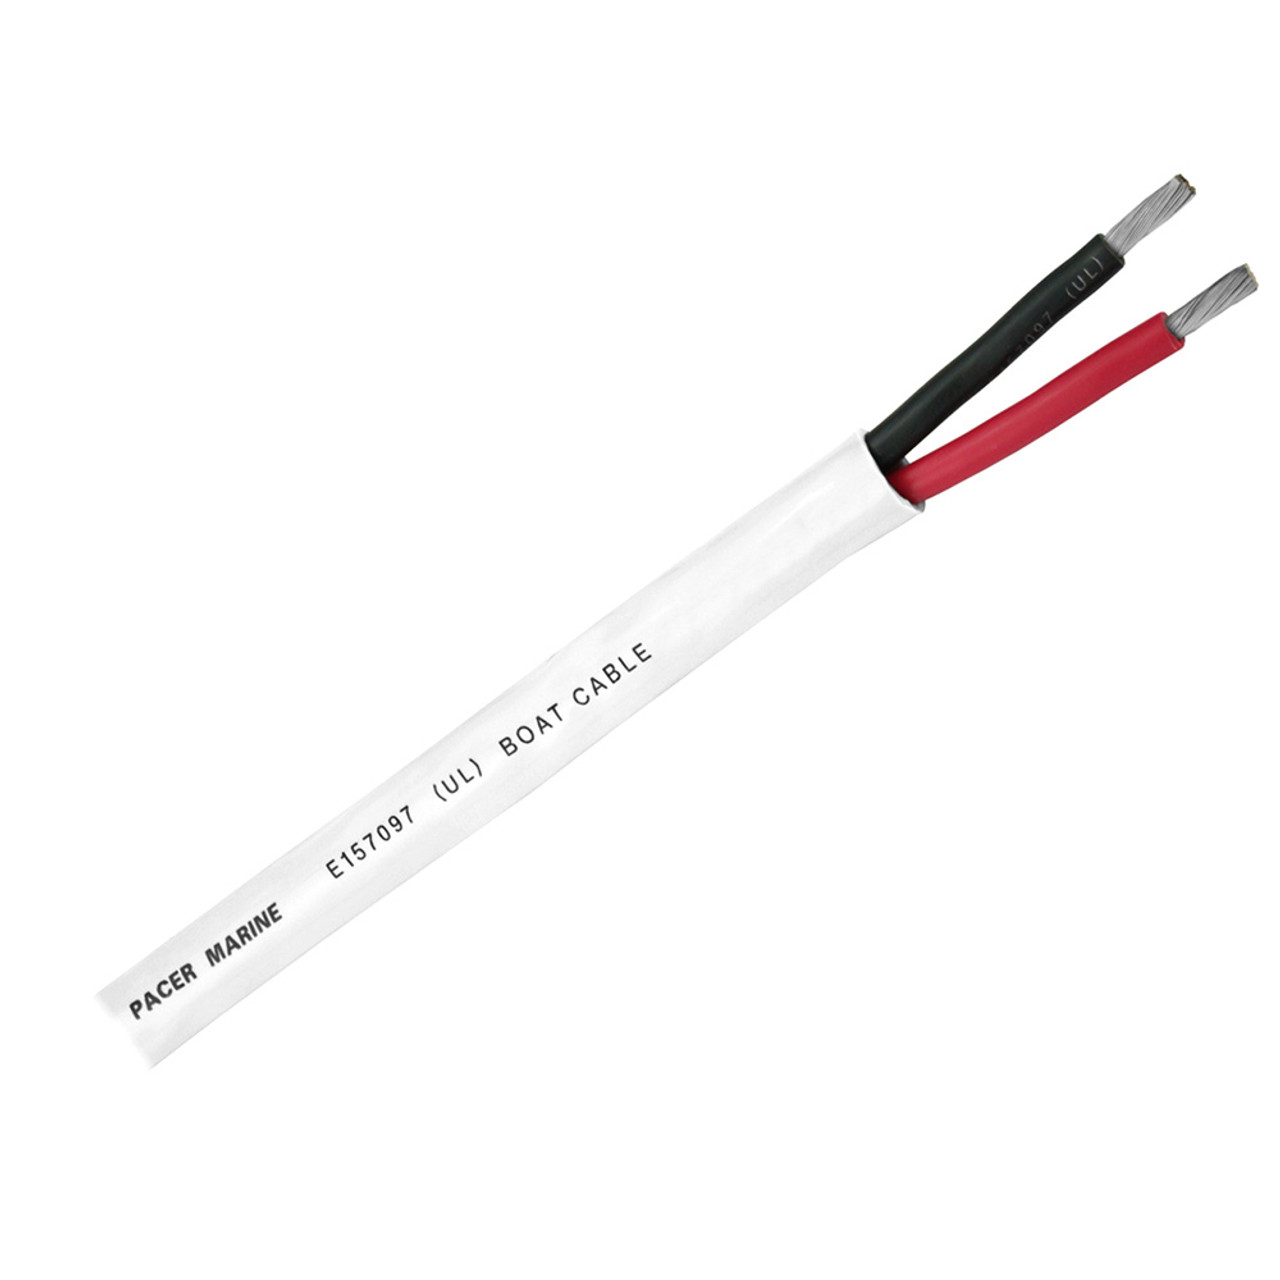 Pacer Duplex 2 Conductor Cable - 500 - 14\/2 AWG - Red, Black [WR14\/2DC-500]